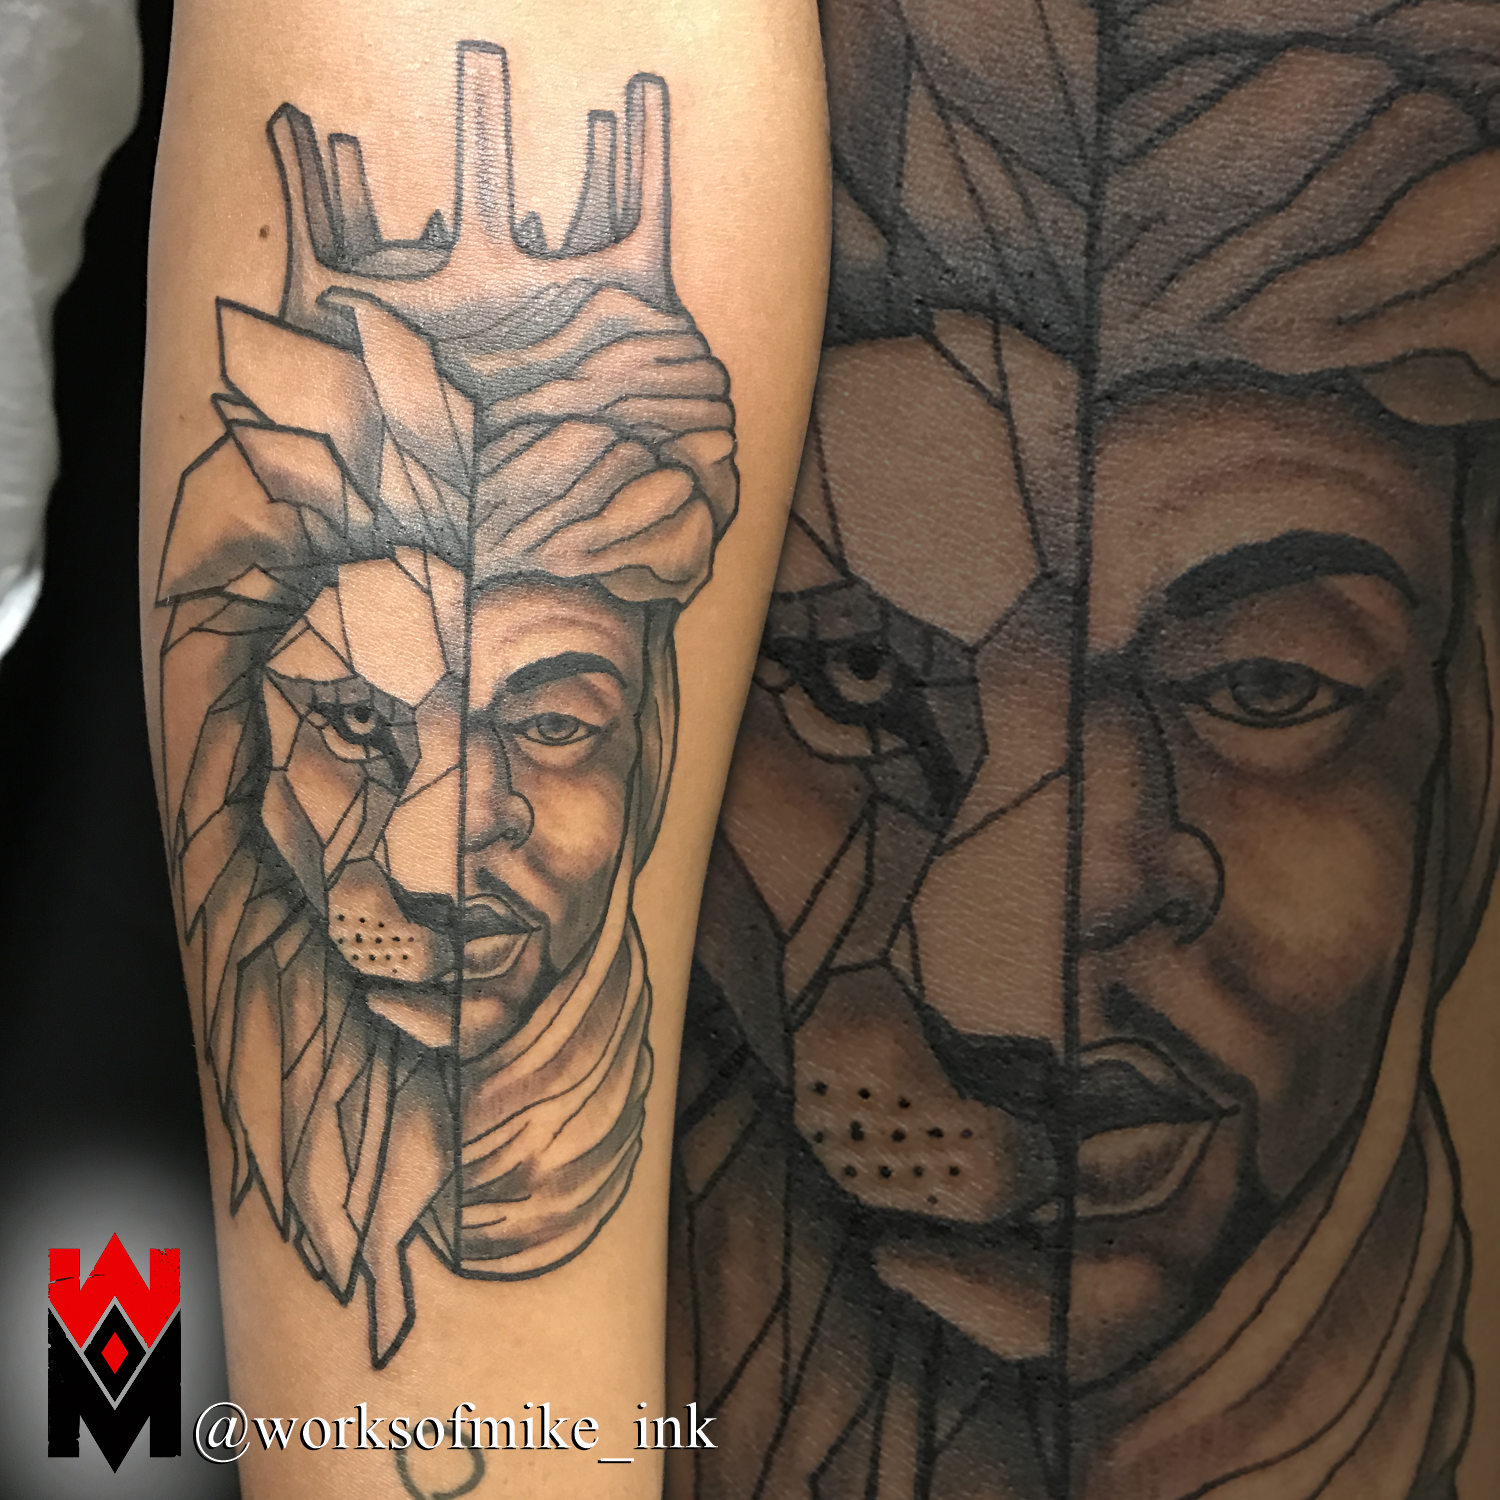 TATTOOS | Works Of Mike, Ink